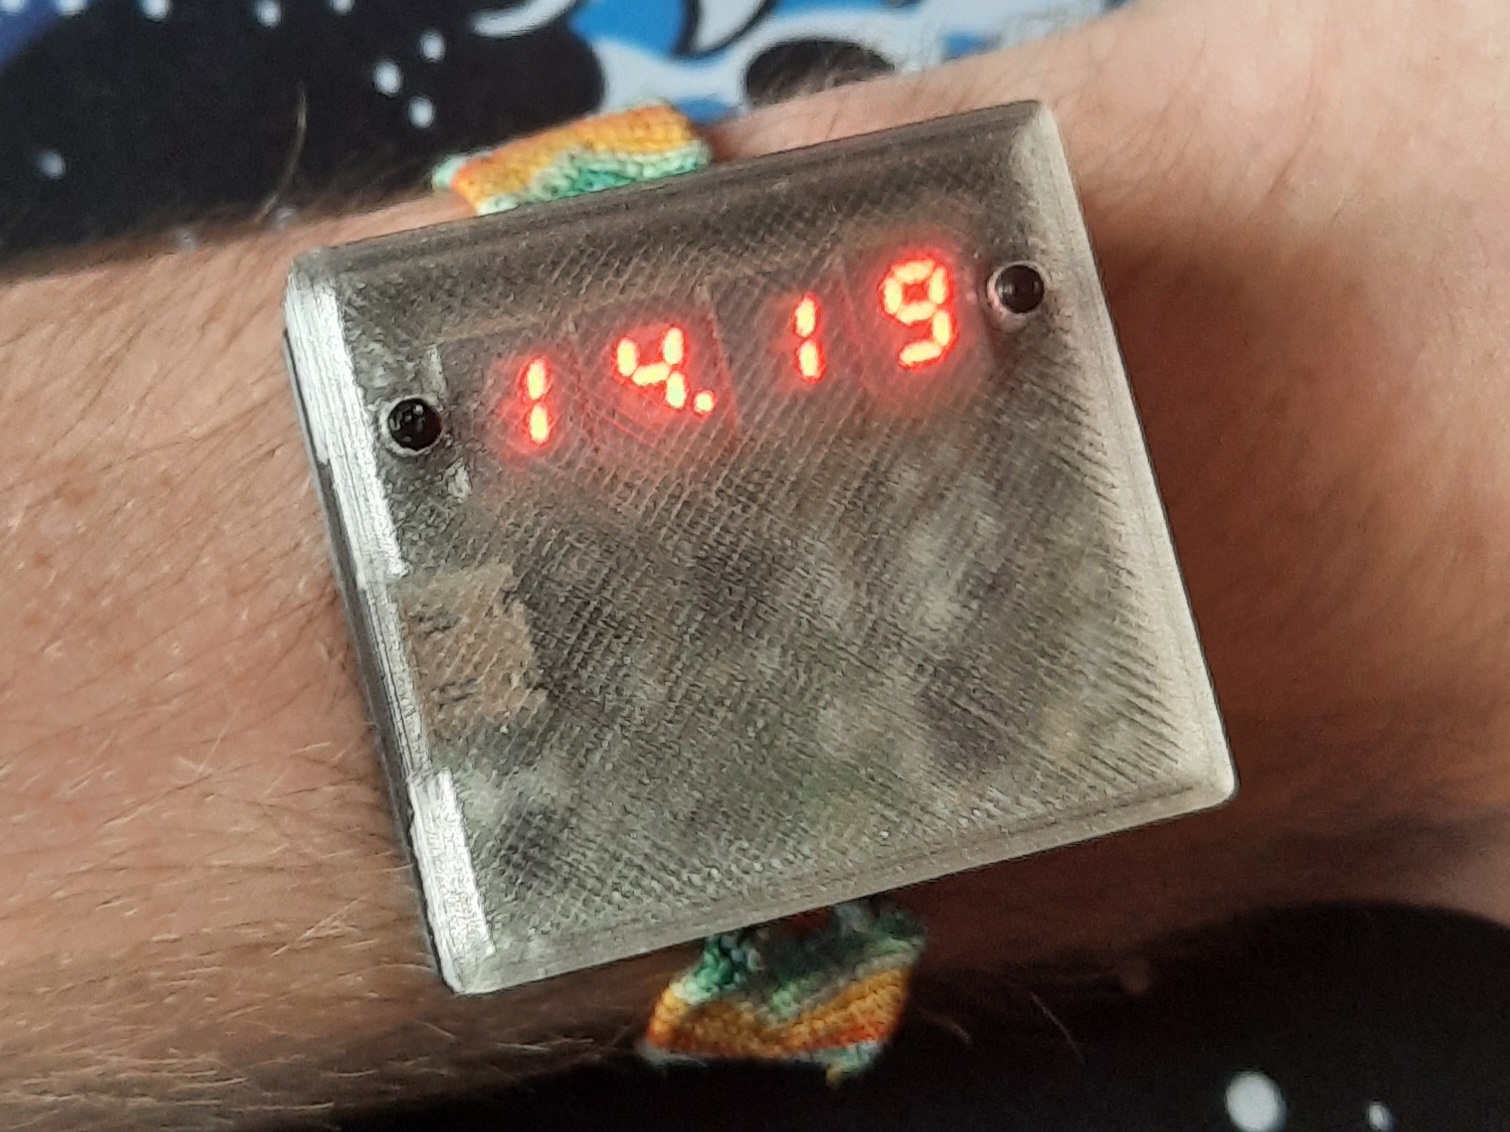 A picture of myself wearing my custom wrist watch. It's displaying the current time using four red seven segment displays.